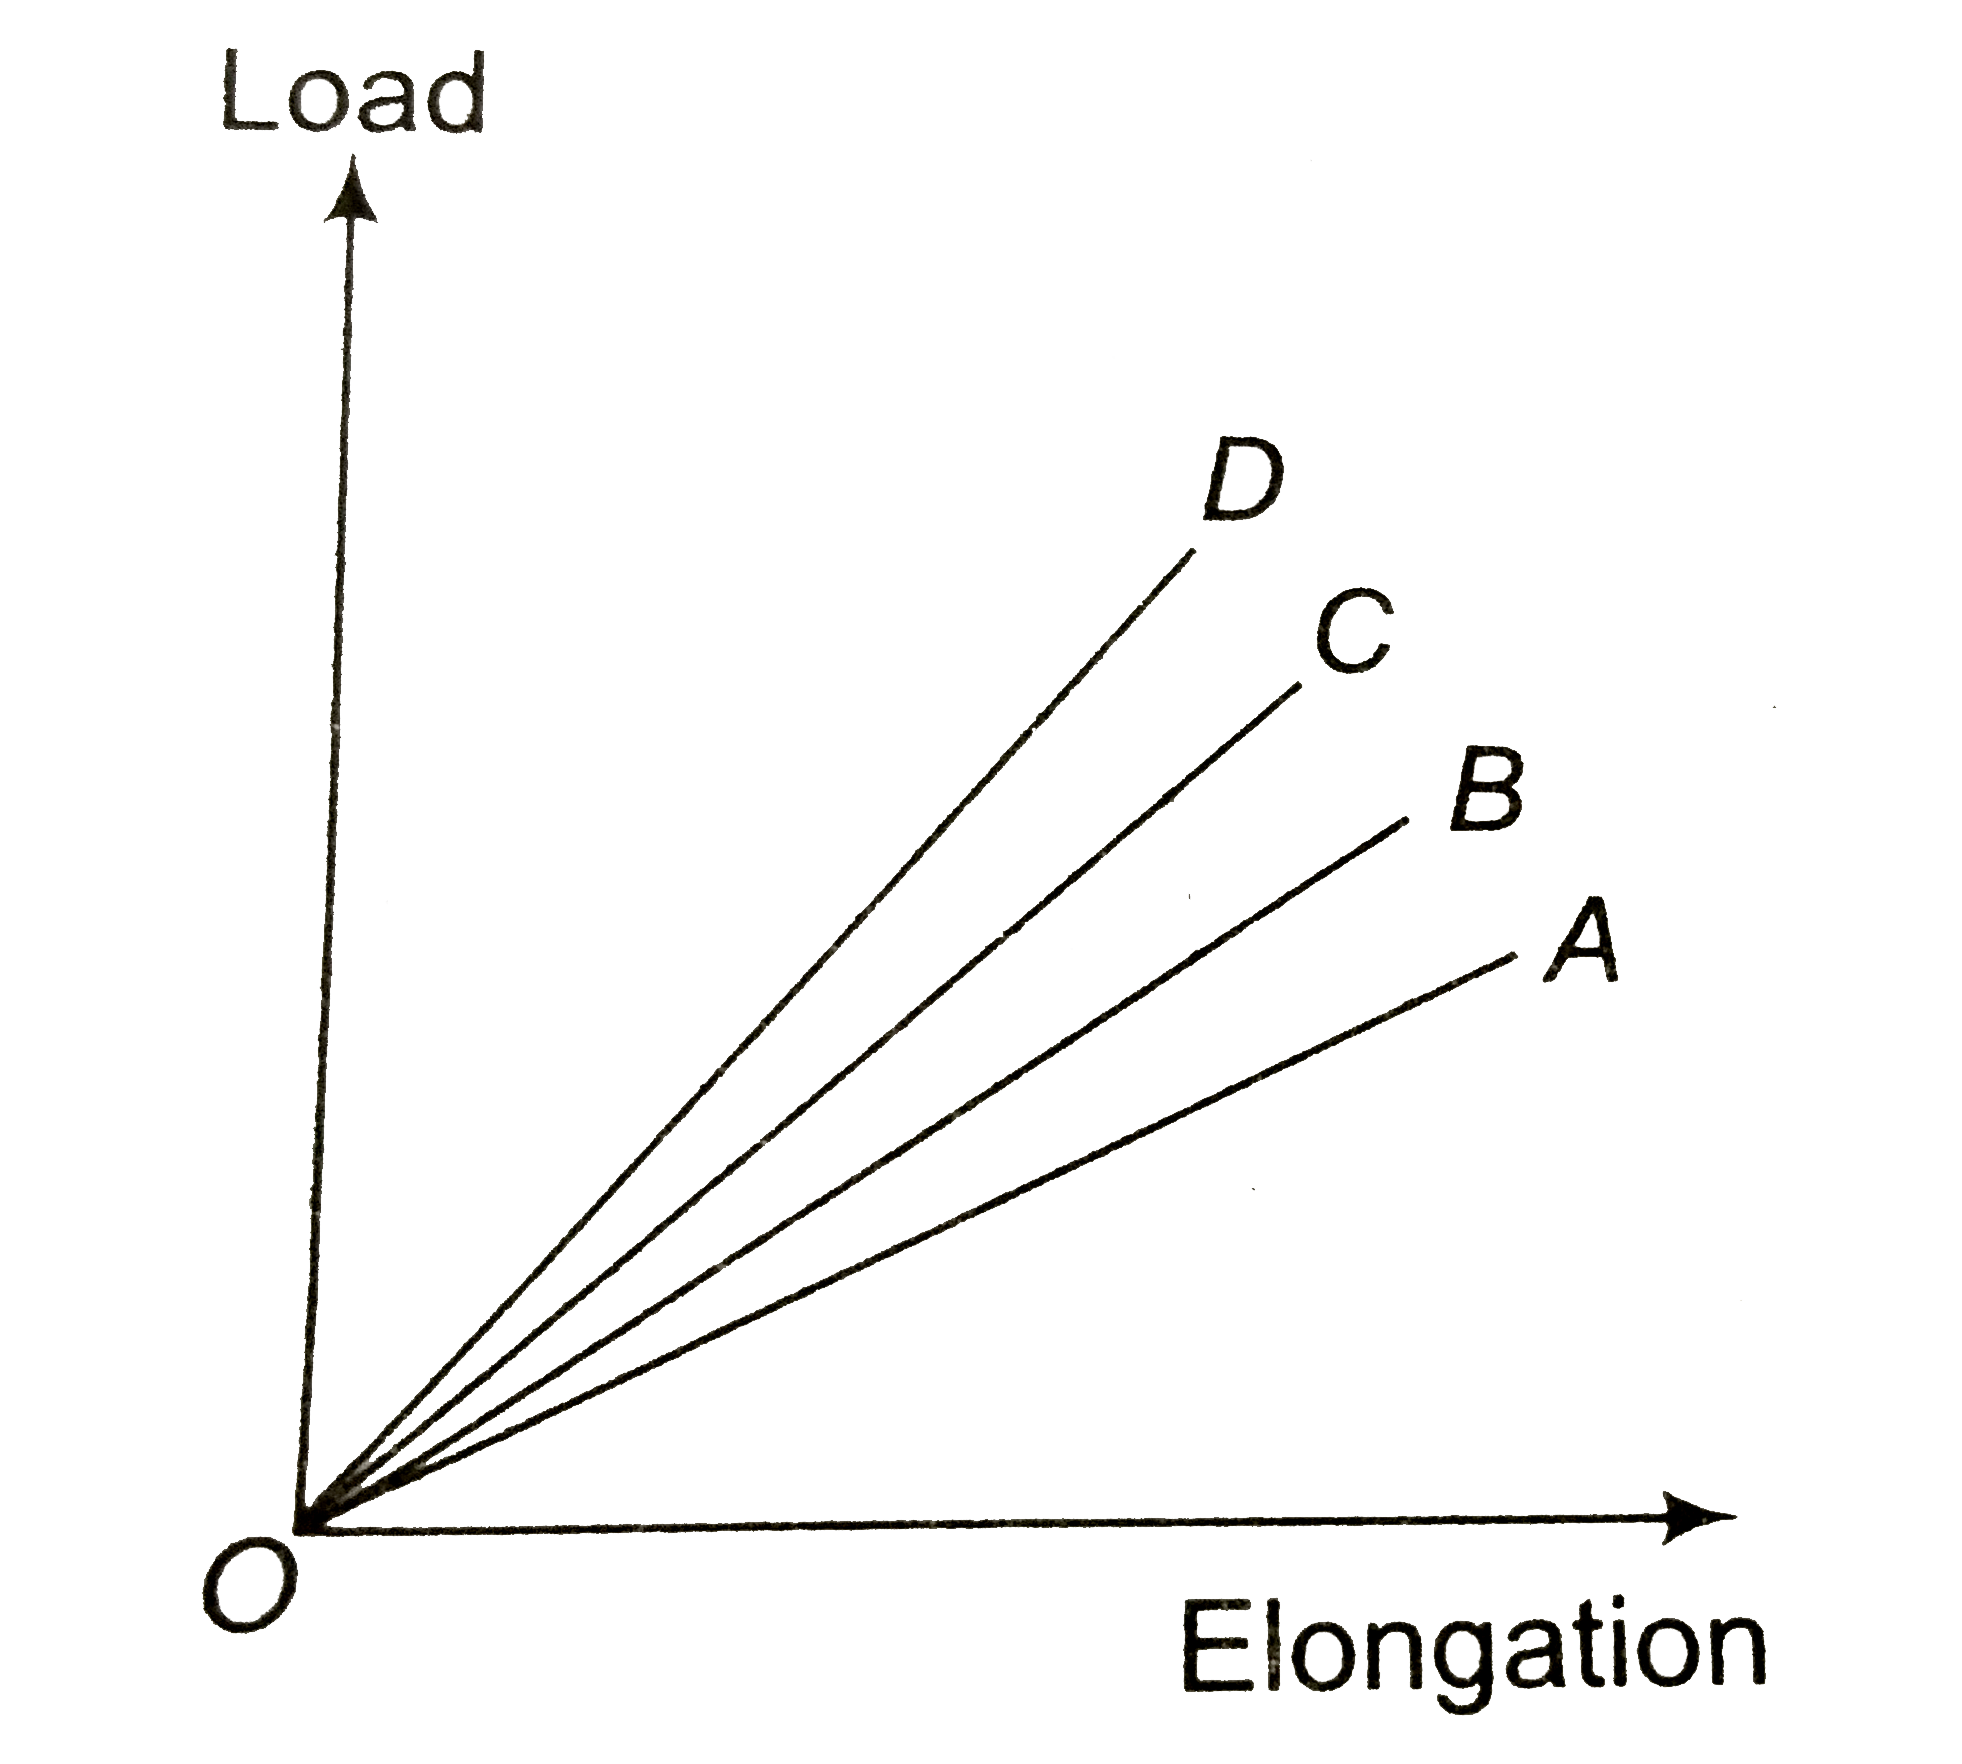 The load versus elongation graph for four wires of the same materials shown in the figure. The thinnest wire it represented by the line